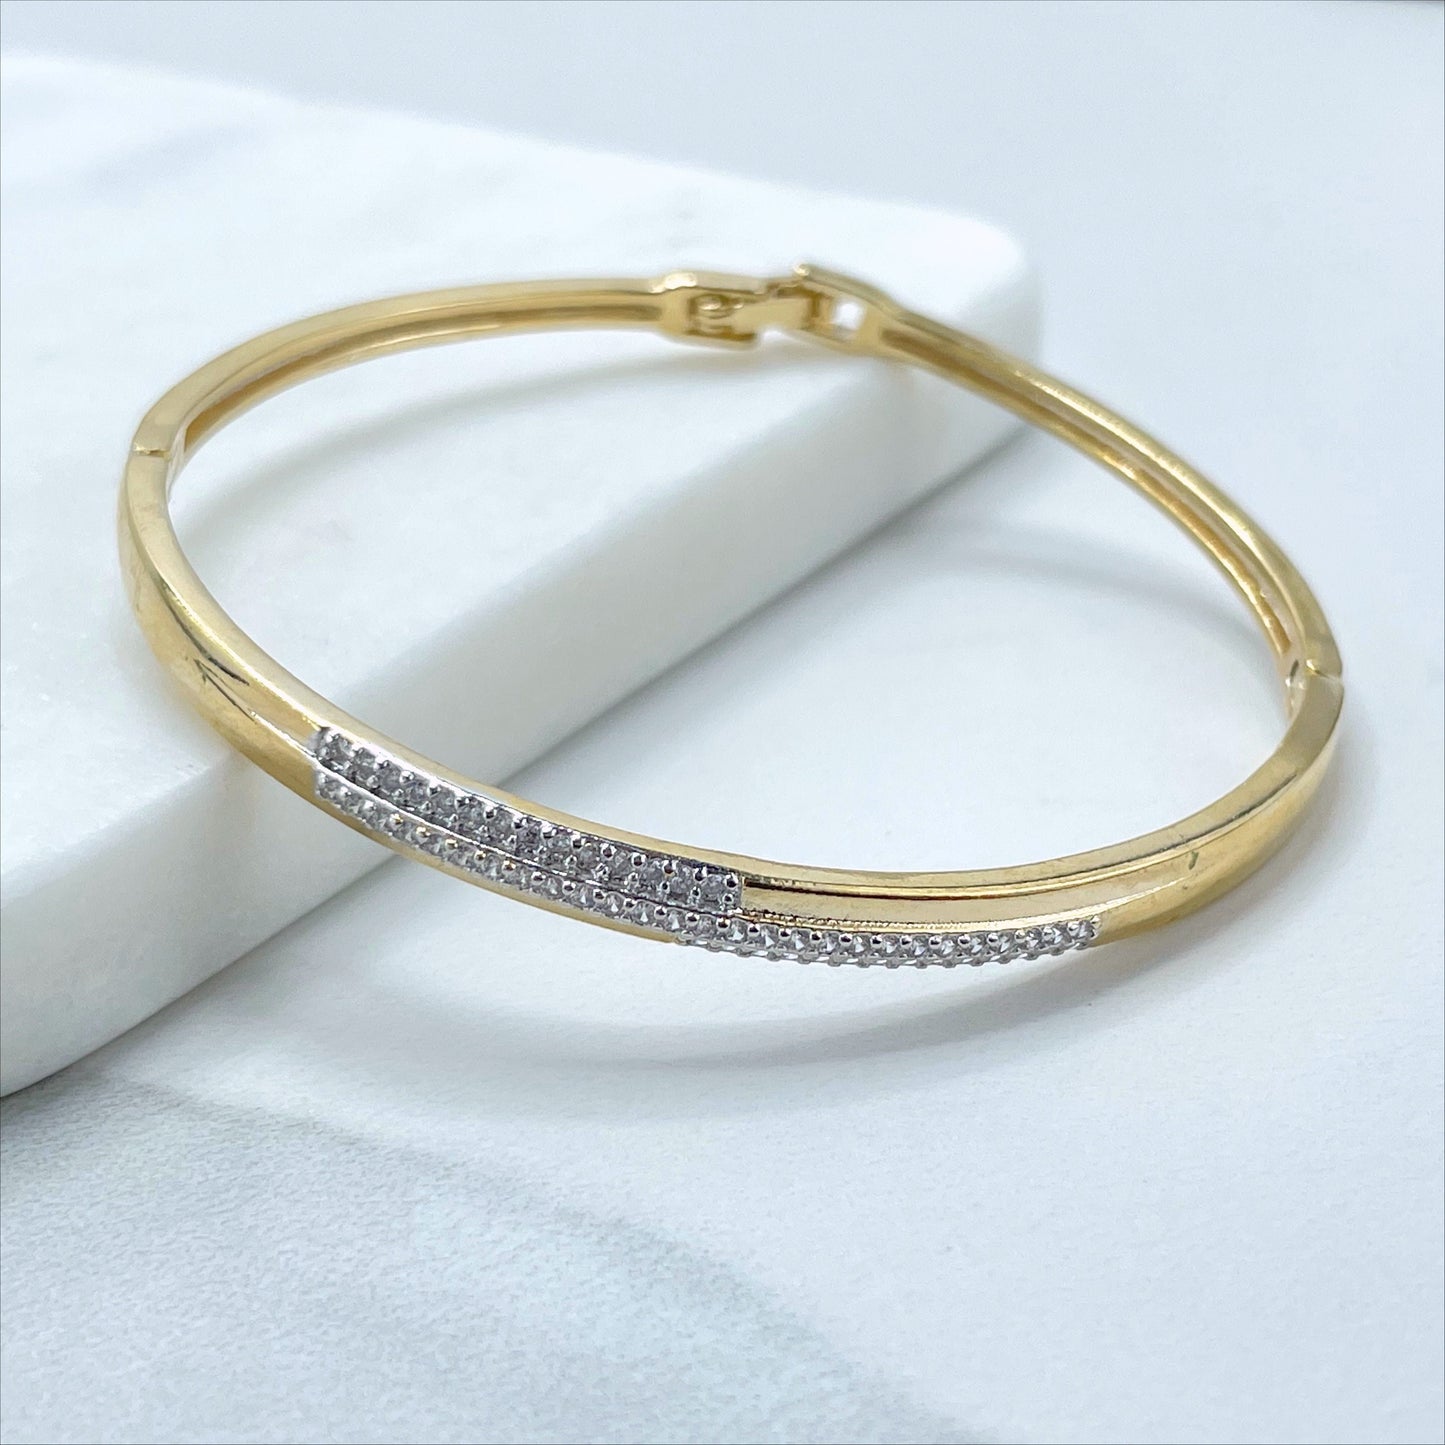 18k Gold Filled and Silver Filled with Cubic Zirconia Bangle Bracelet Wholesale Jewelry Supplies